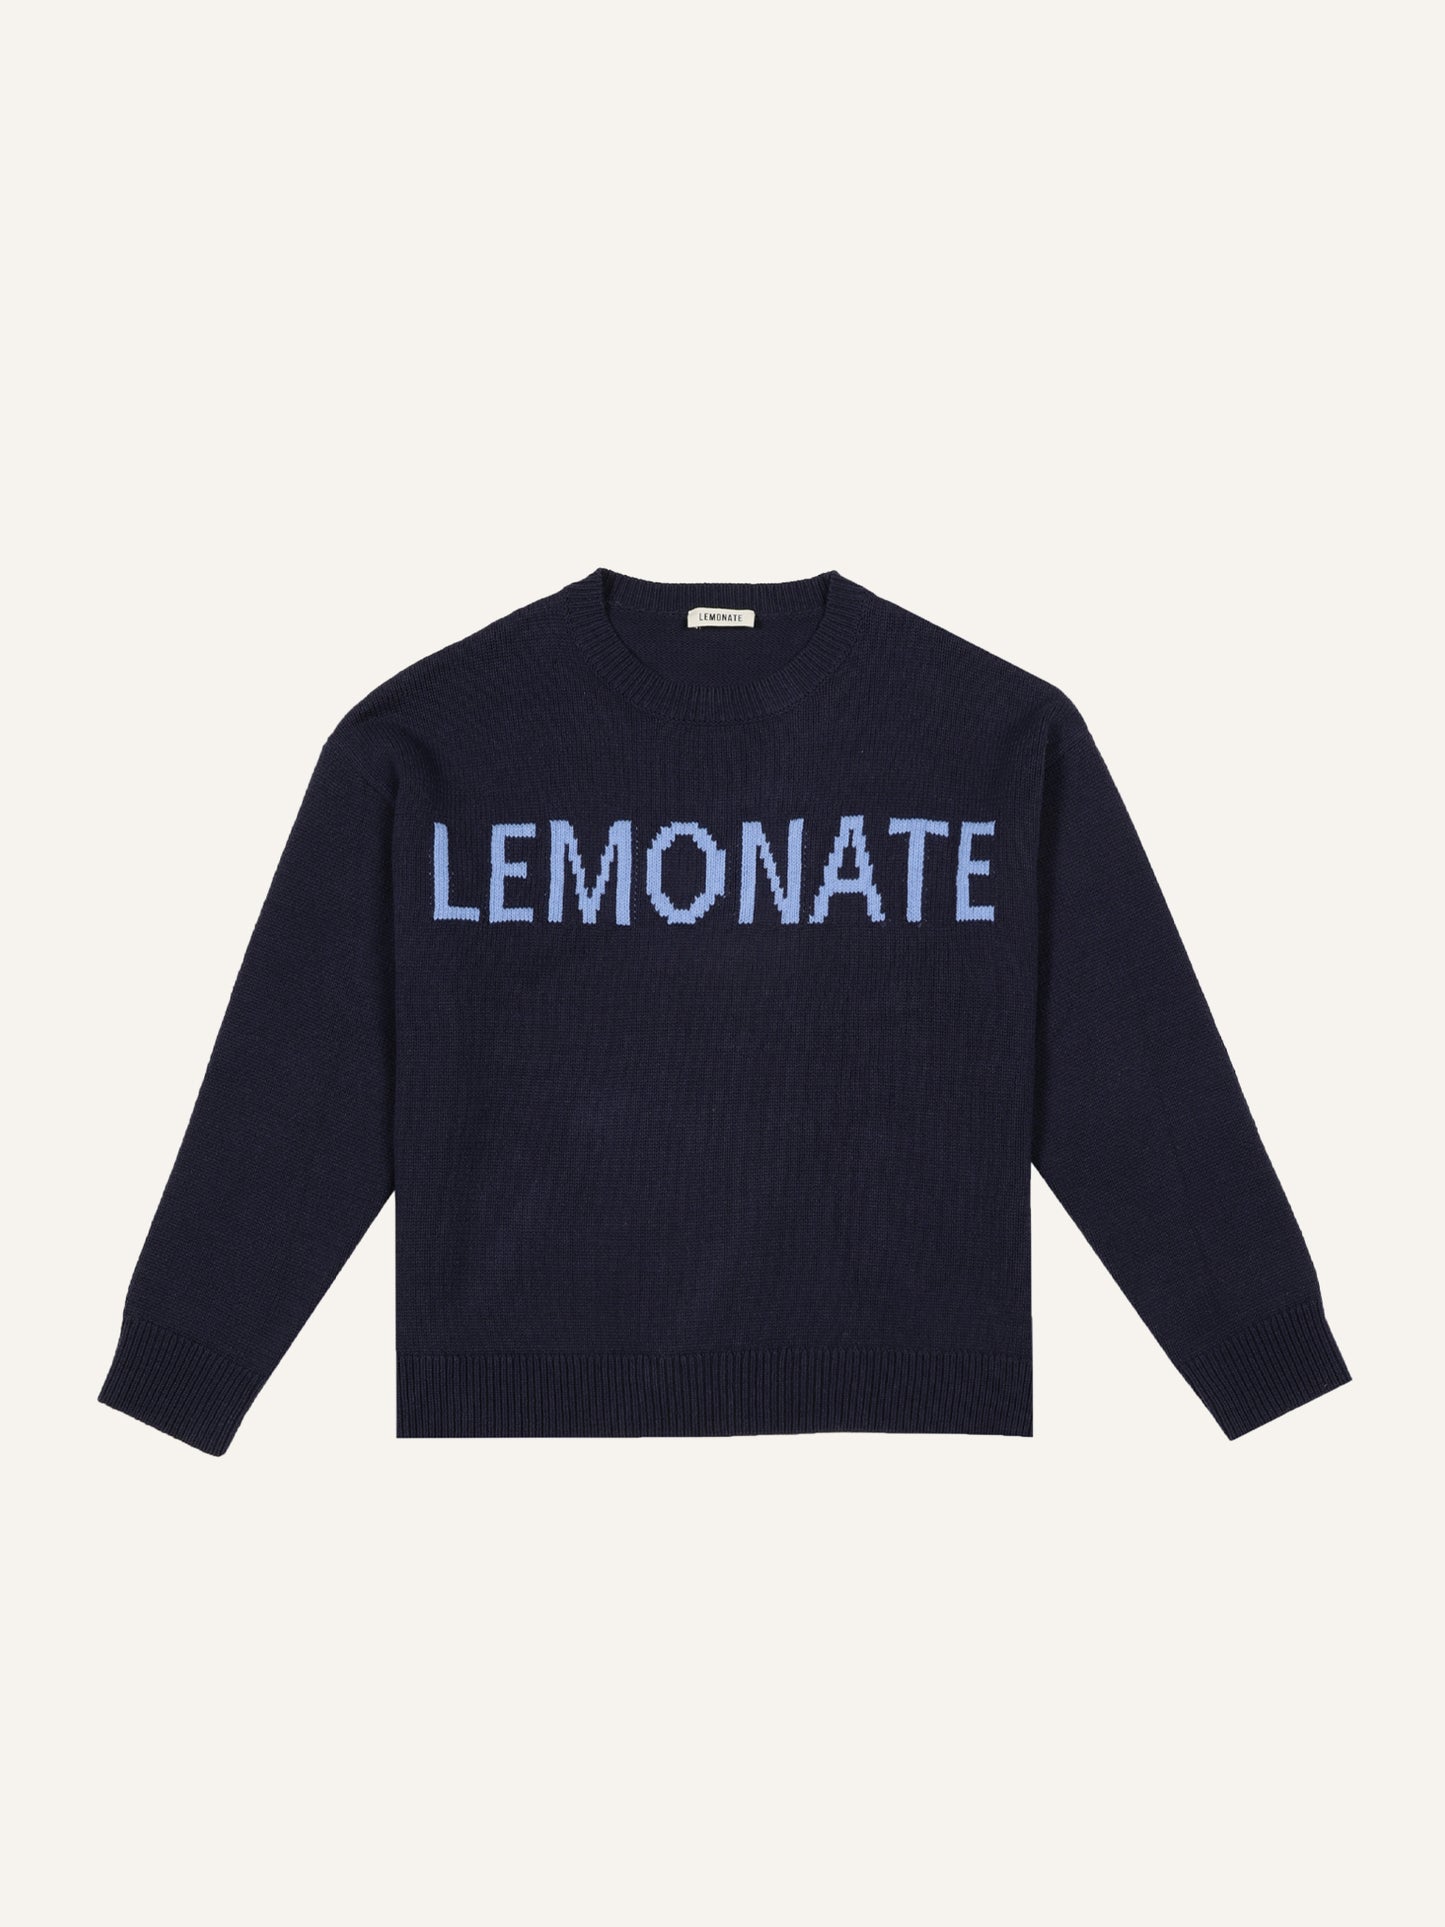 KNITTED LOGO SWEATER NAVY BLUE